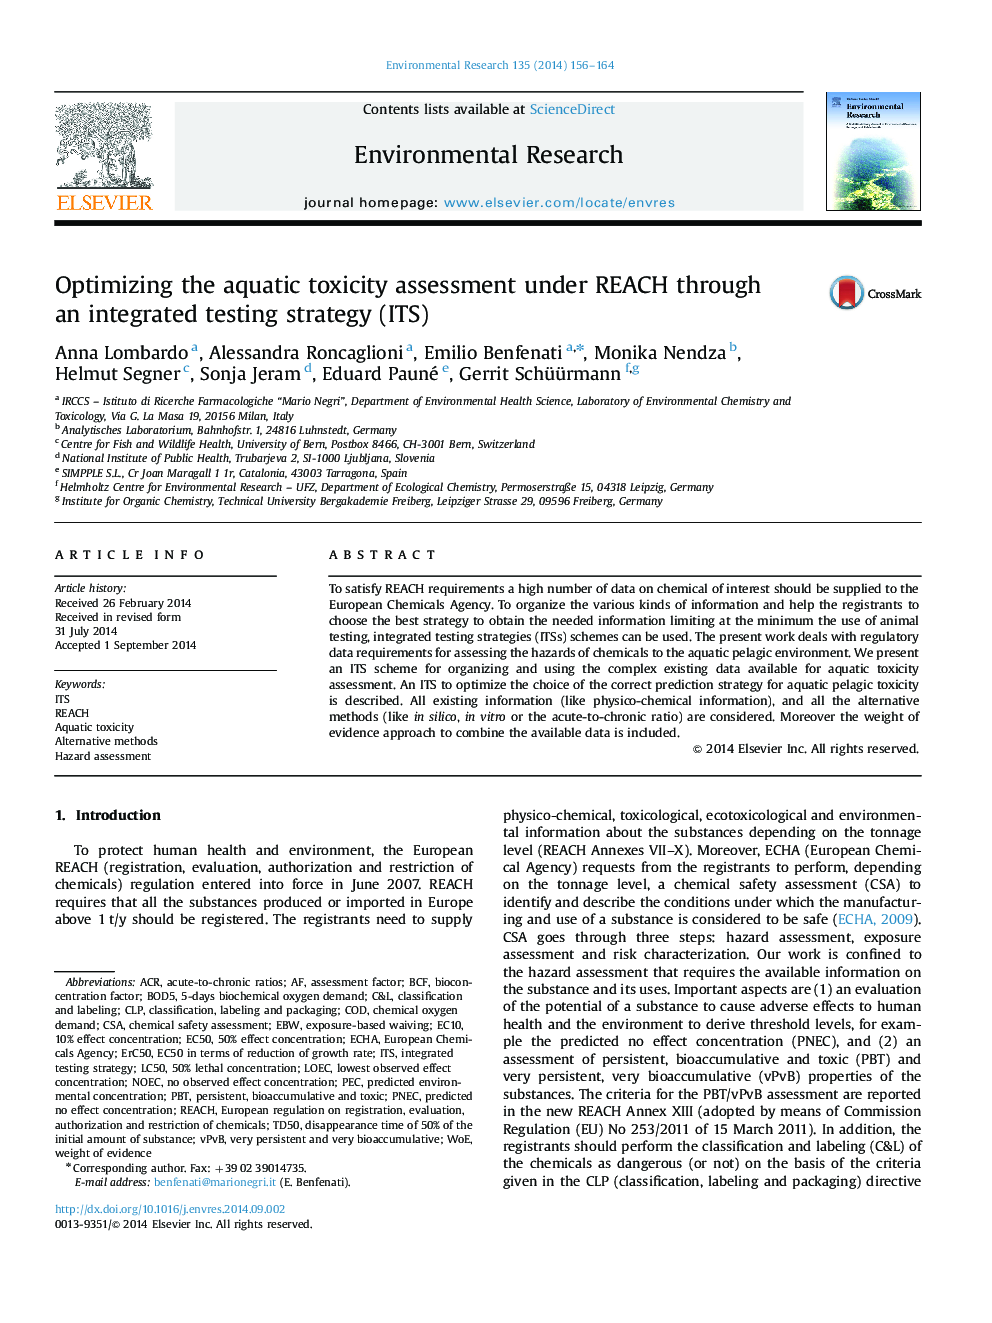 Optimizing the aquatic toxicity assessment under REACH through an integrated testing strategy (ITS)